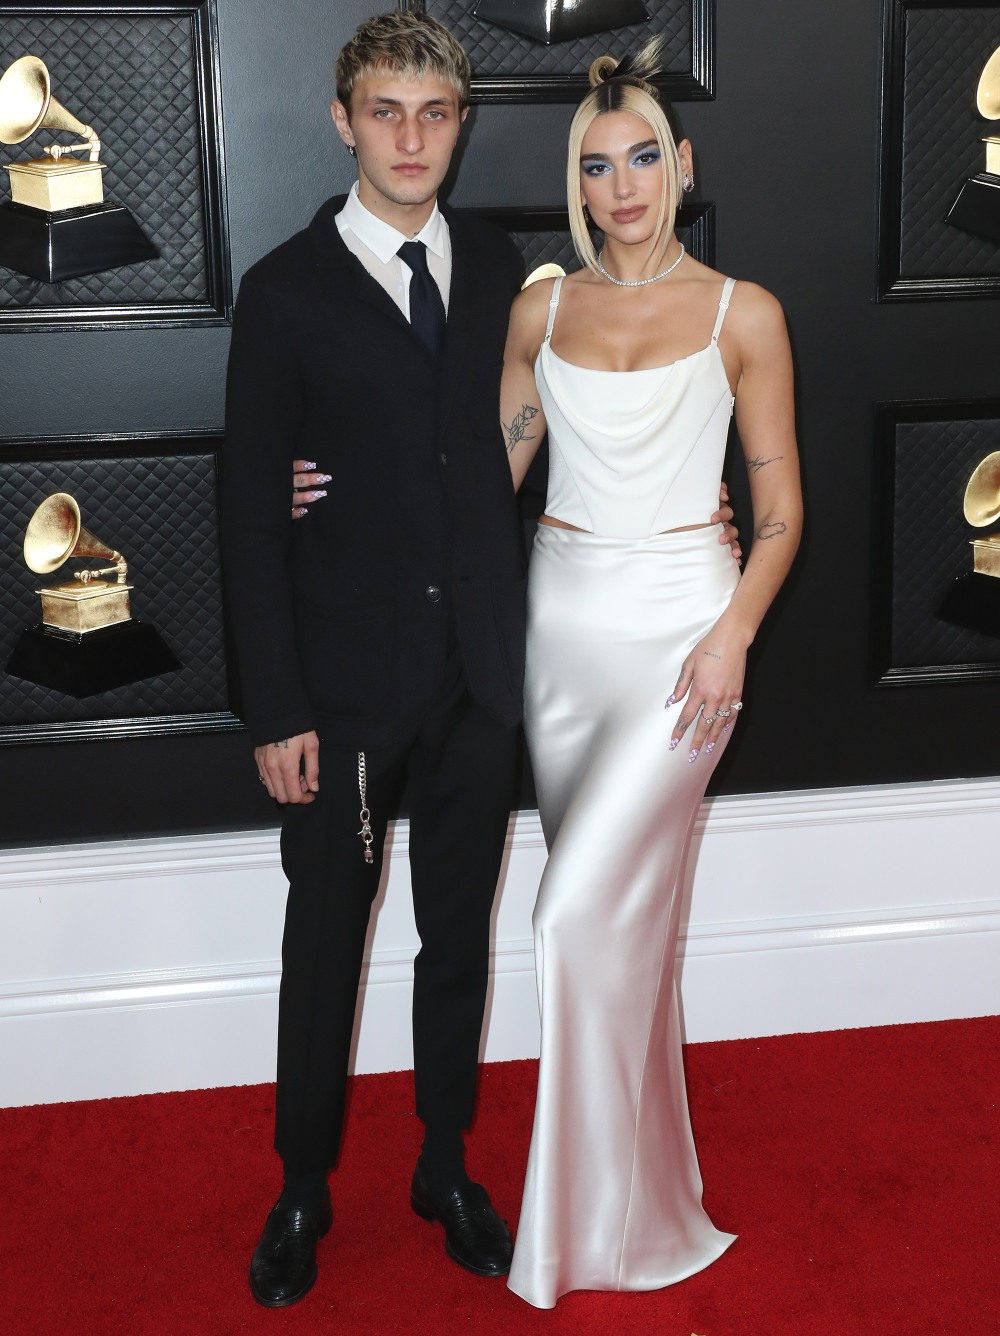 Anwar Hadid and Dua Lipa arrive at the 62nd Annual GRAMMY Awards held at Staples Center on January 26, 2020 in Los Angeles, California, United States.